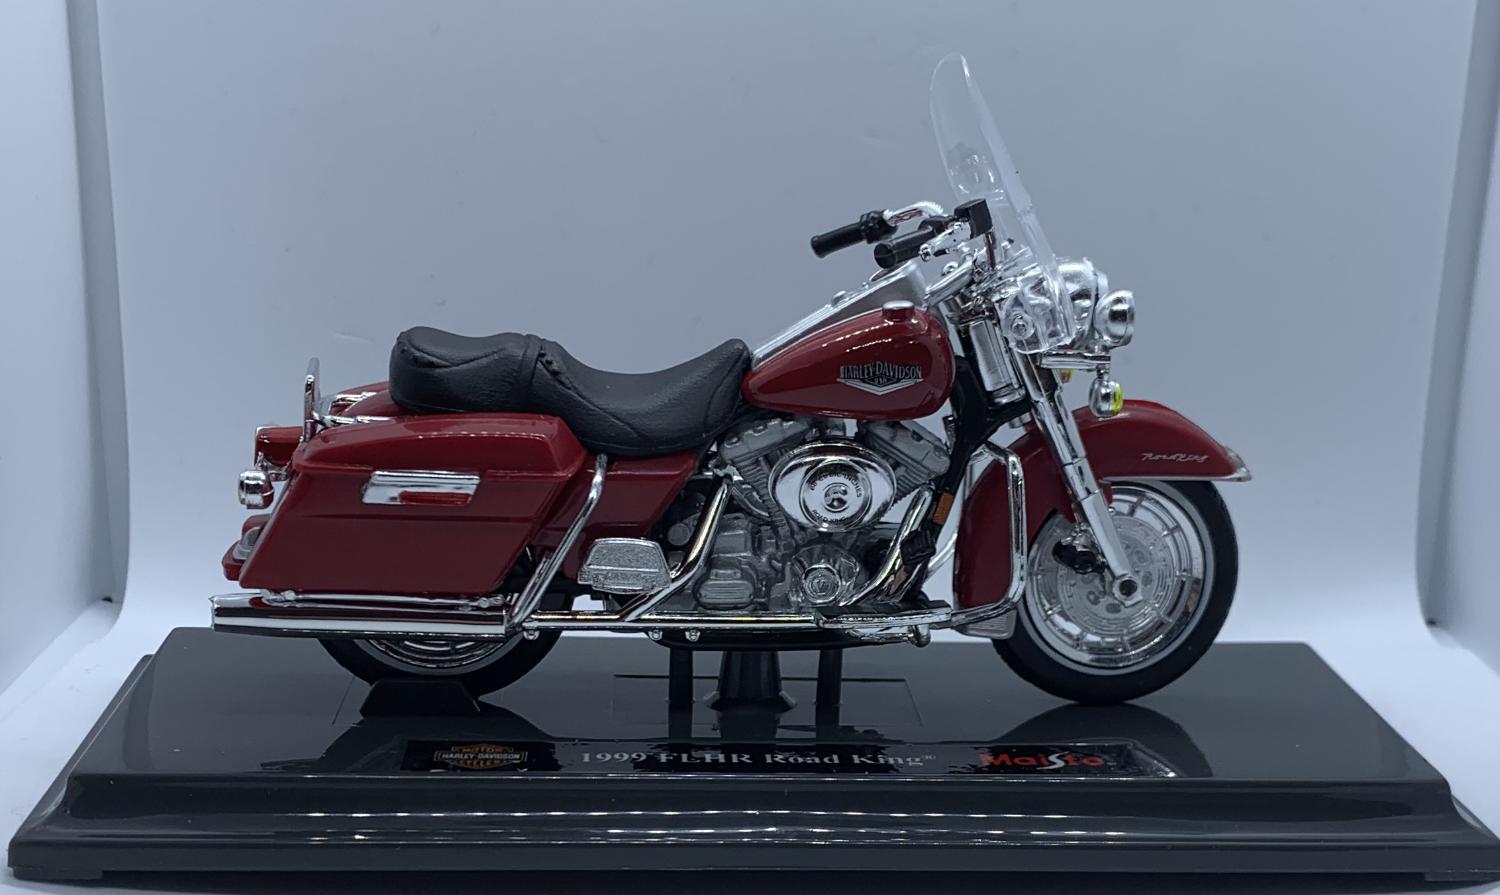 Harley Davidson 1999 FLHR Road King 1:18 scale model from Maisto